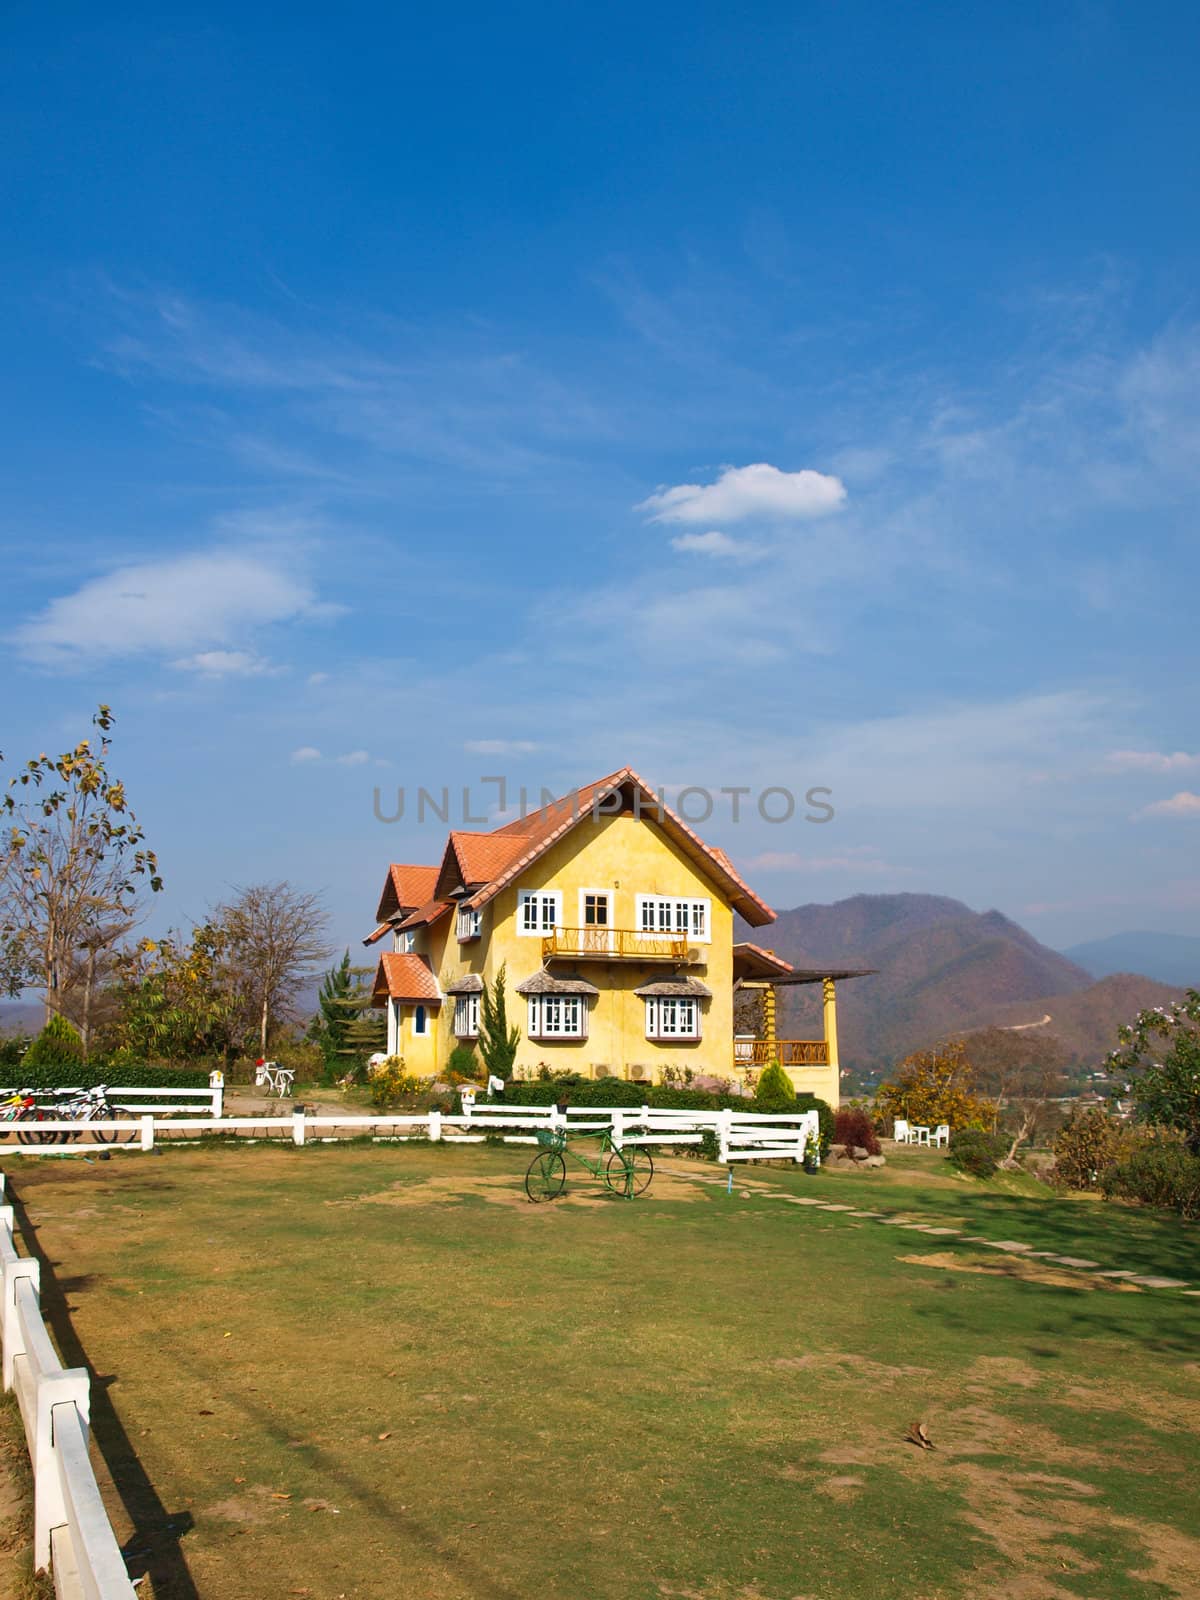 Yellow lovely house and blue sky in pai, mae hong son, thailand